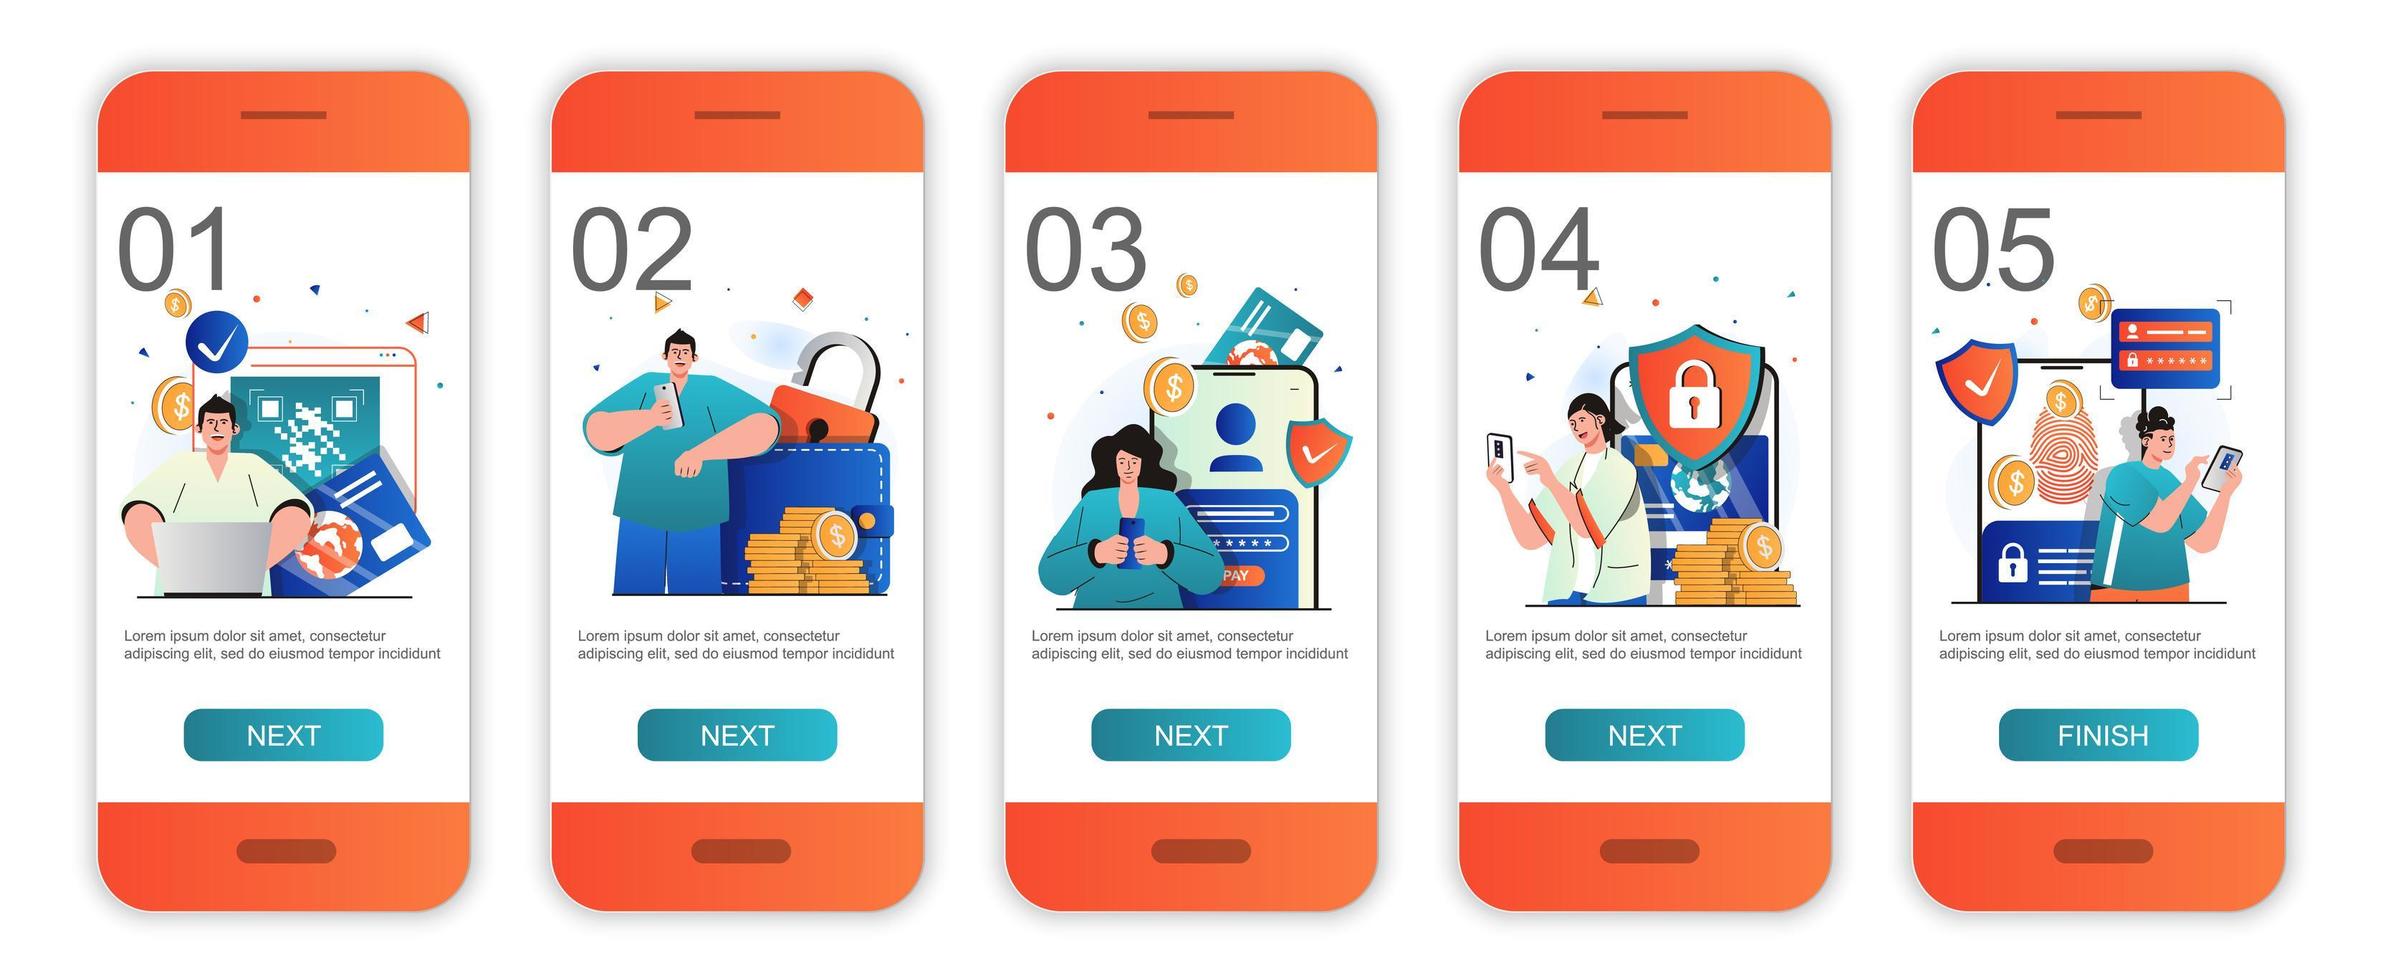 Secure payment concept onboarding screens for mobile app templates. Protection of transactions. Modern UI, UX, GUI screens user interface kit with people scenes for web design. Vector illustration